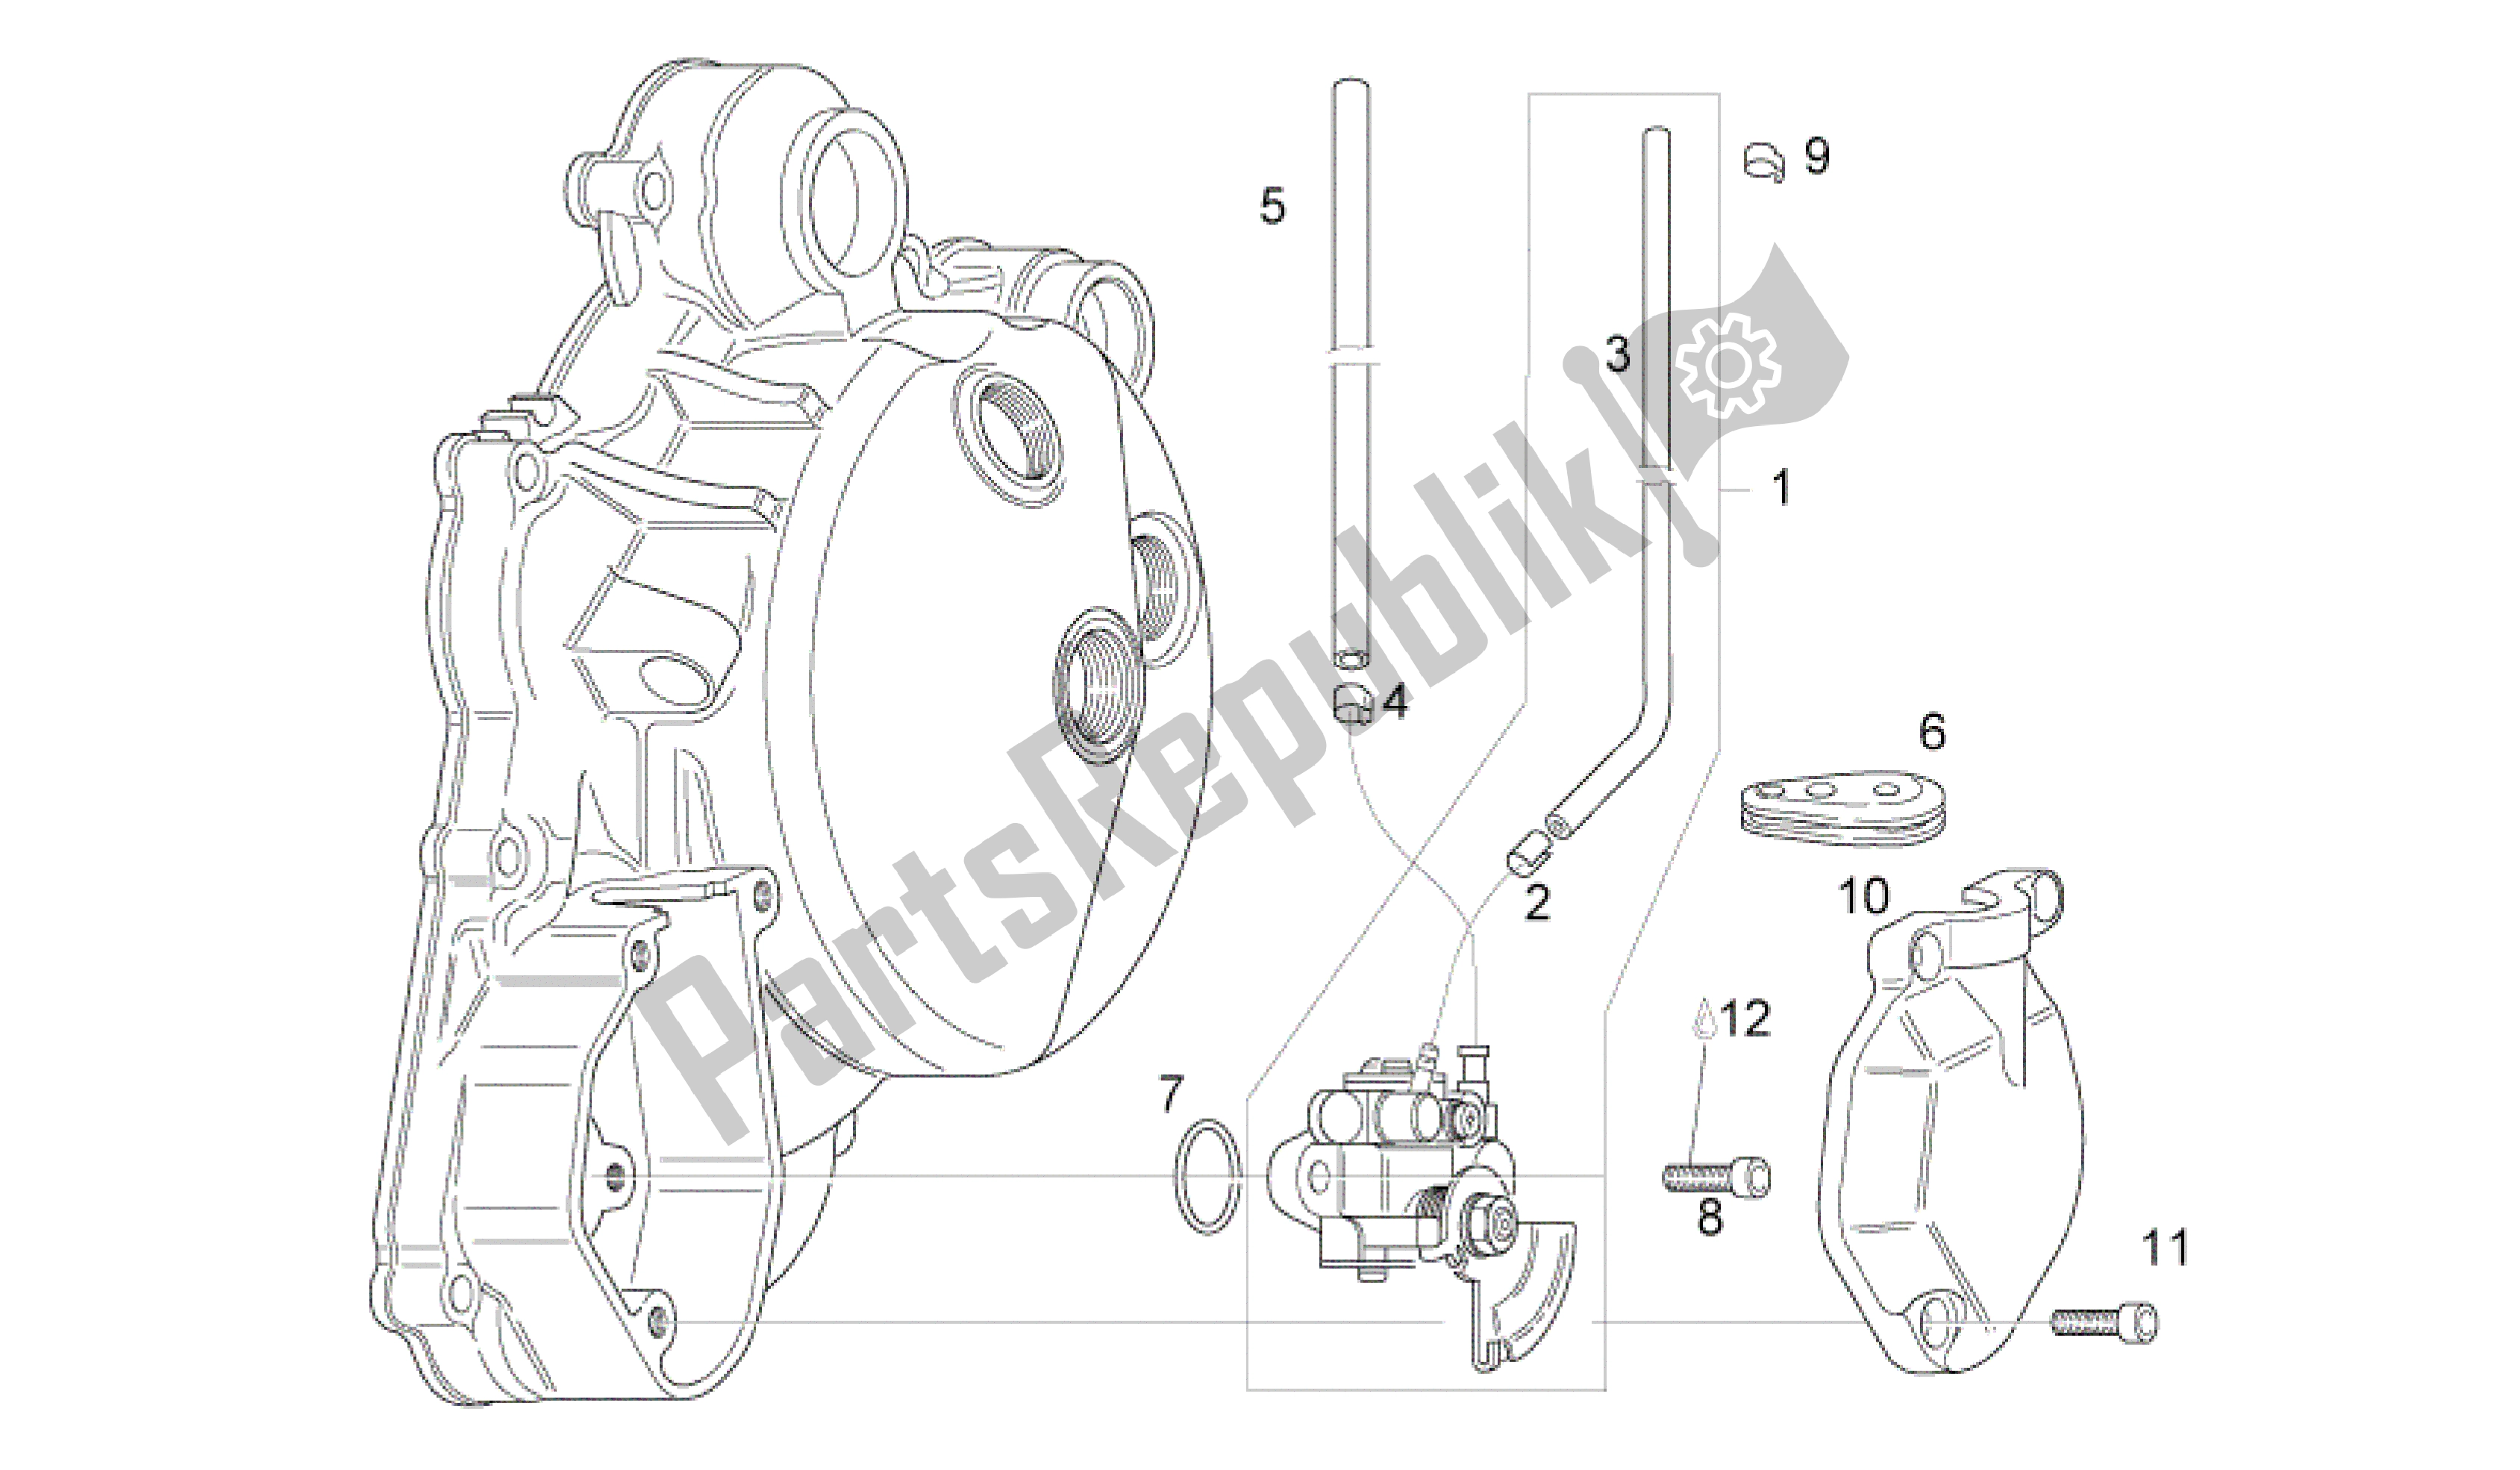 All parts for the Bomba Aceite of the Aprilia RS 125 2006 - 2010